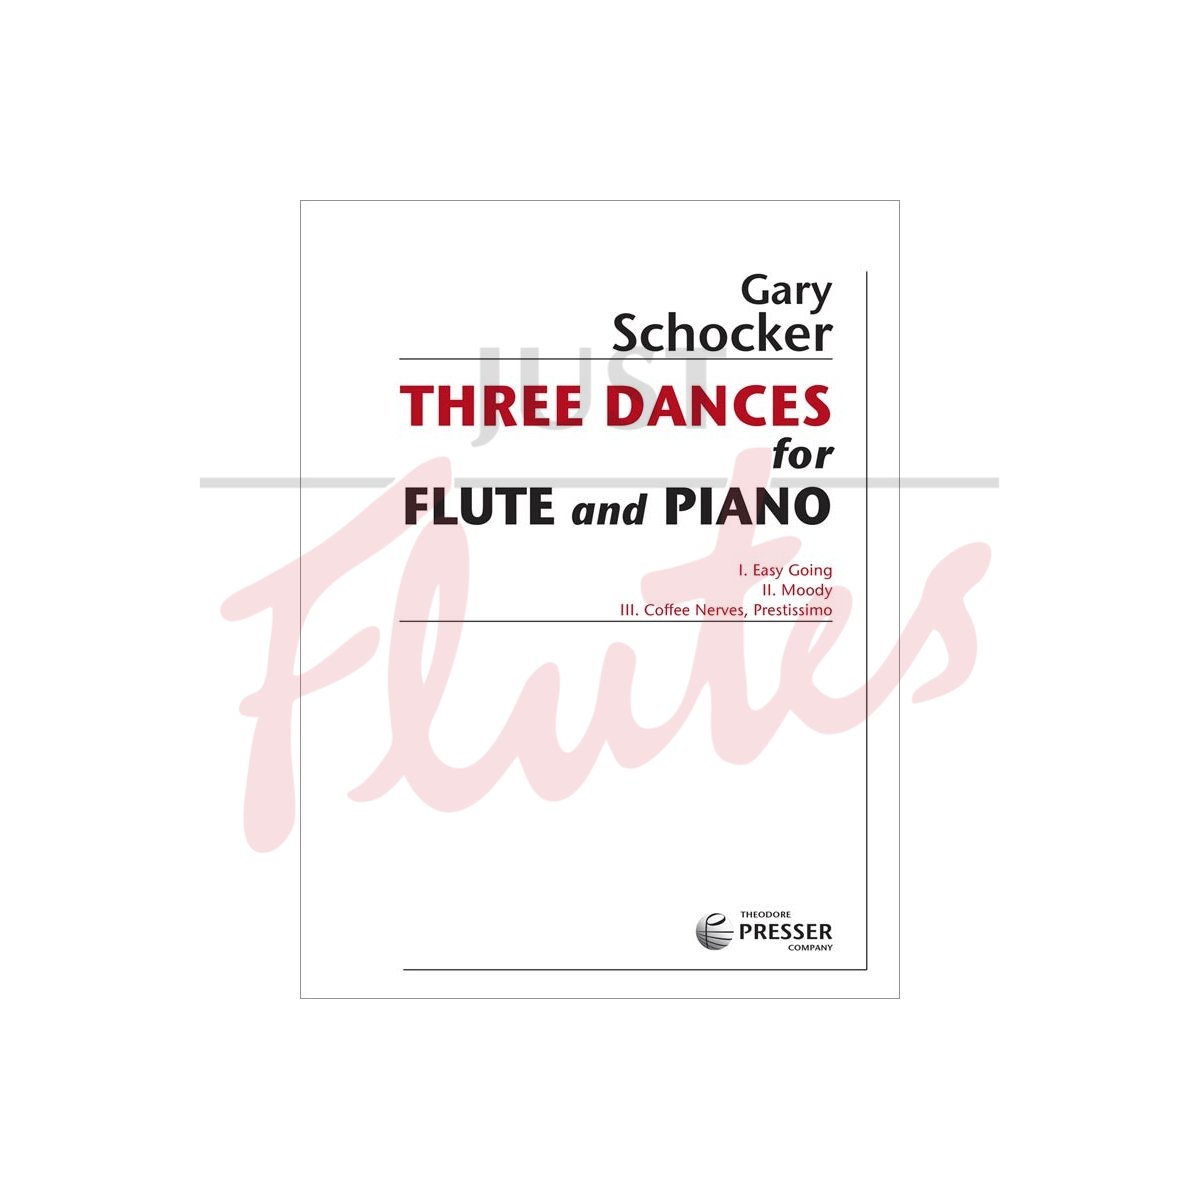 Three Dances for Flute and Piano